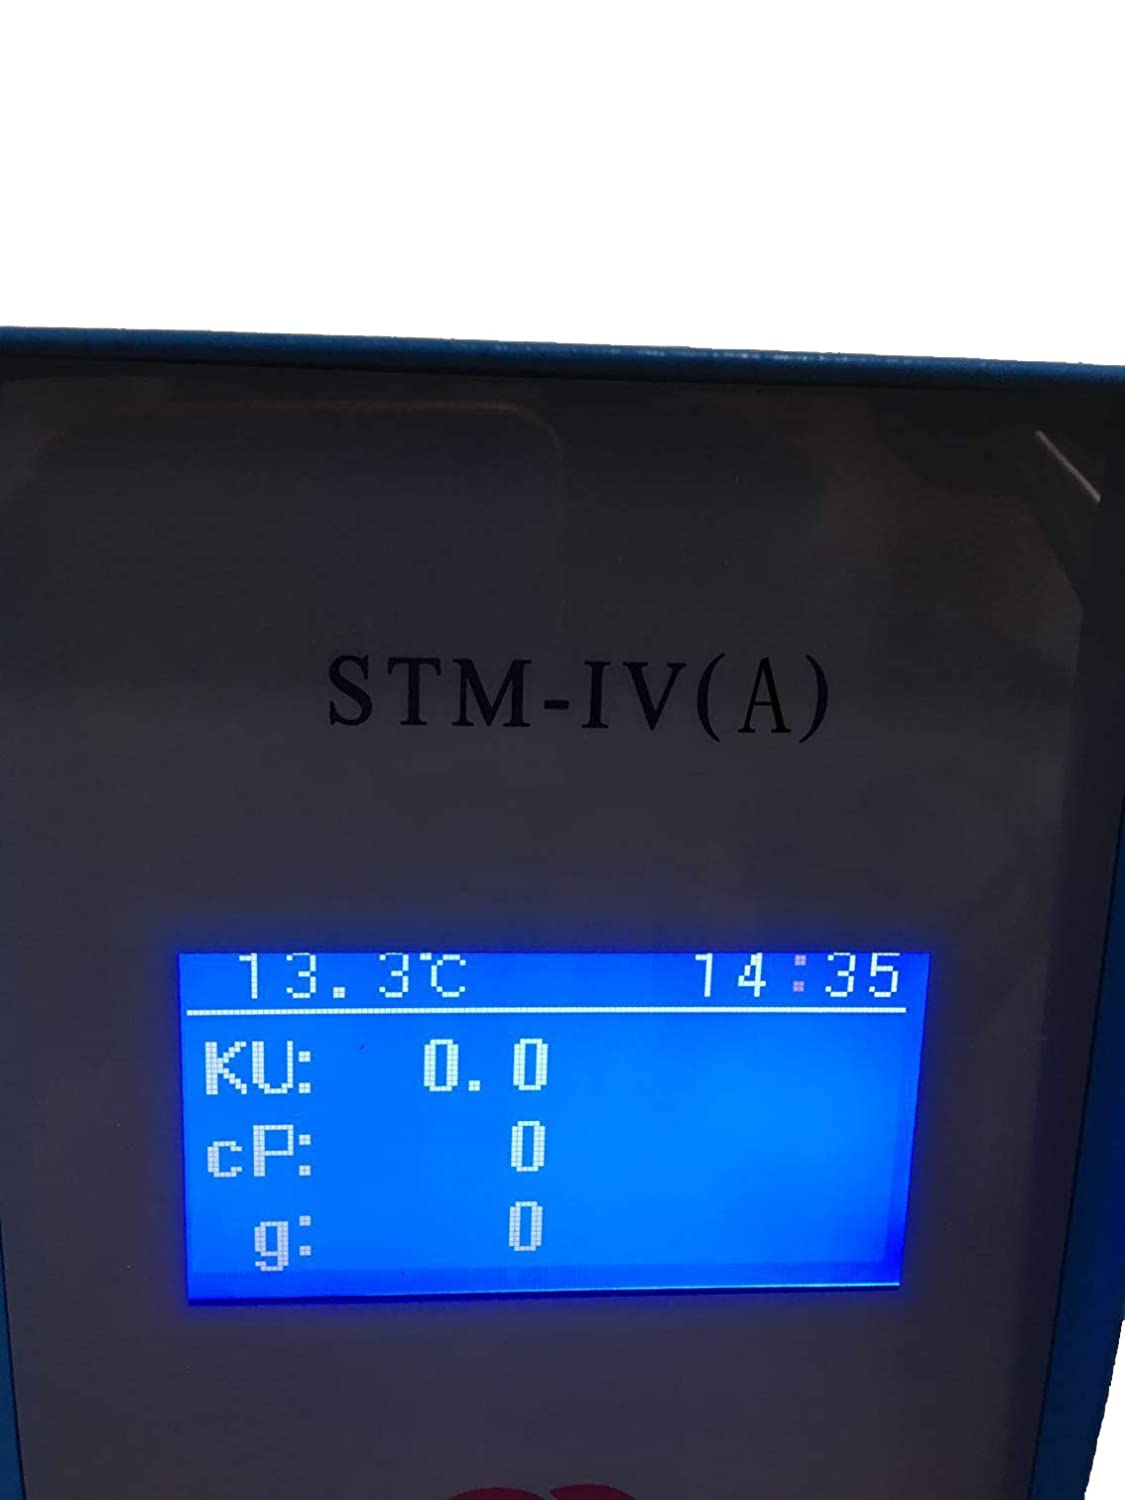 VTSYIQI Stormer Viscometer Viscosity Meter Tester Digital rotational viscometer Rotary visometer with LCD Large Screen KU Unit 40.2 to 141.0KU Accuracy 2.00% for Paint Viscosity Testing